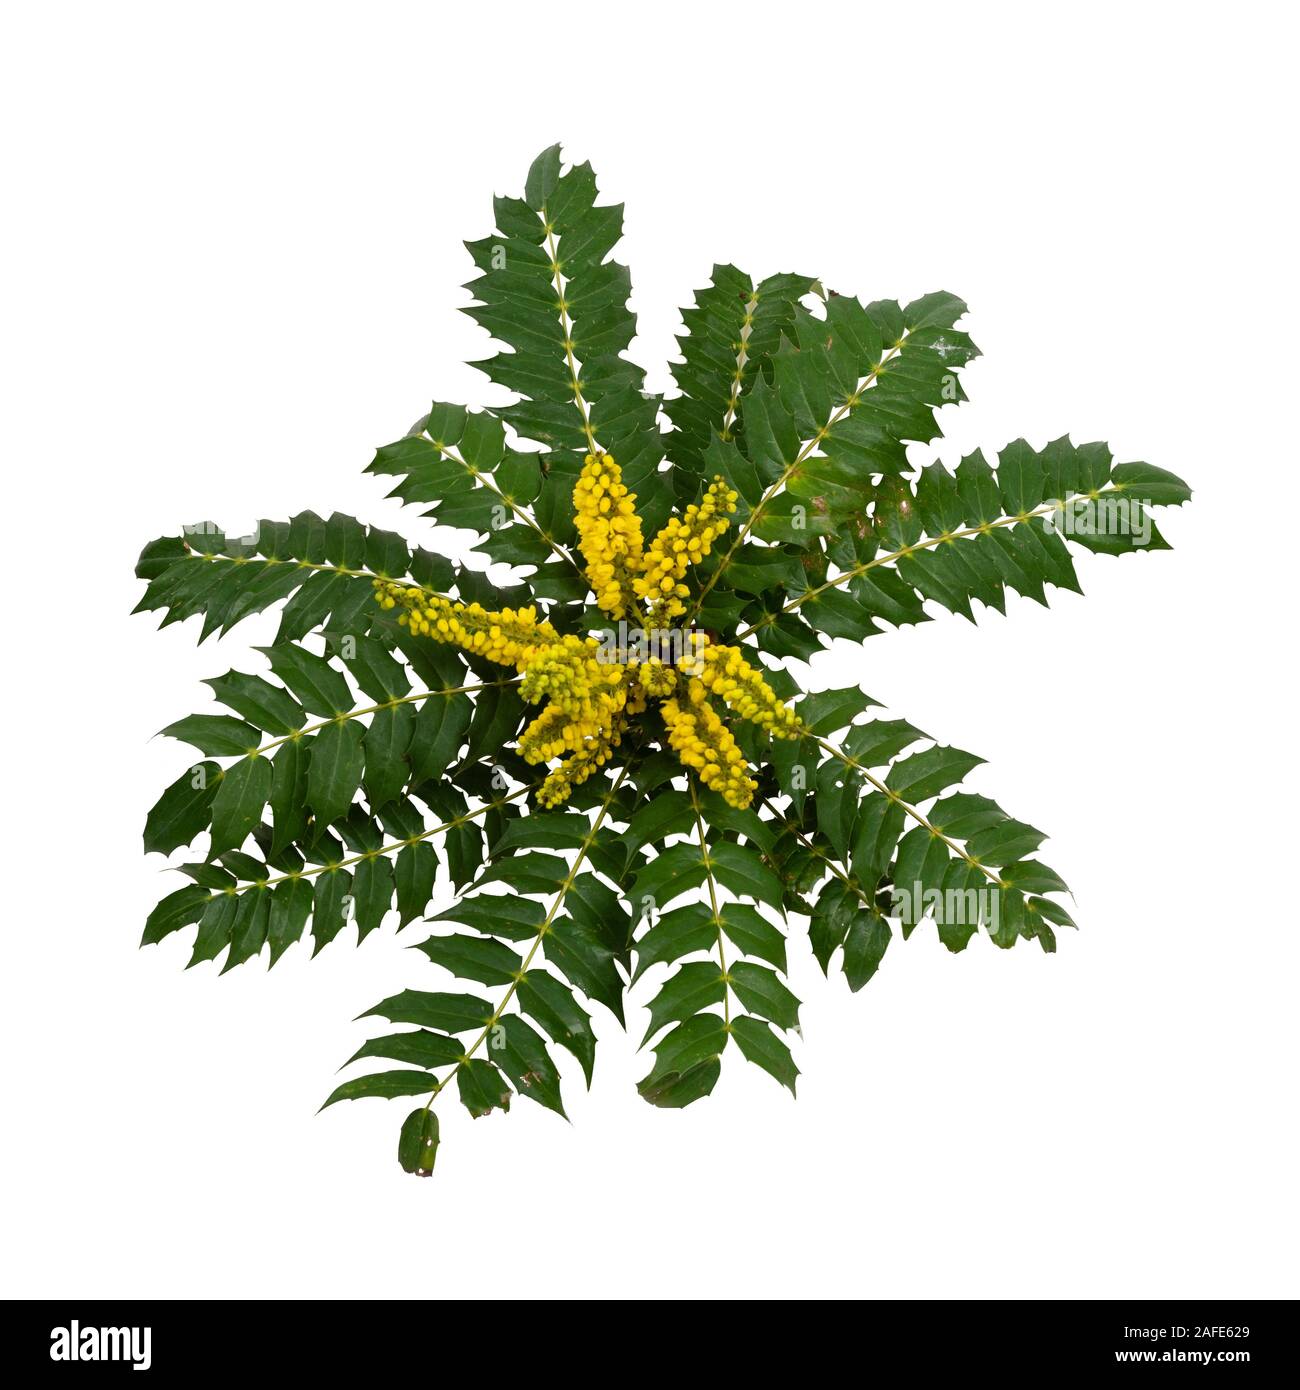 Upright flower spikes and, spiky leaves of the hardy evergreen shrub, Mahonia x media 'Winter Sun' on a white background Stock Photo